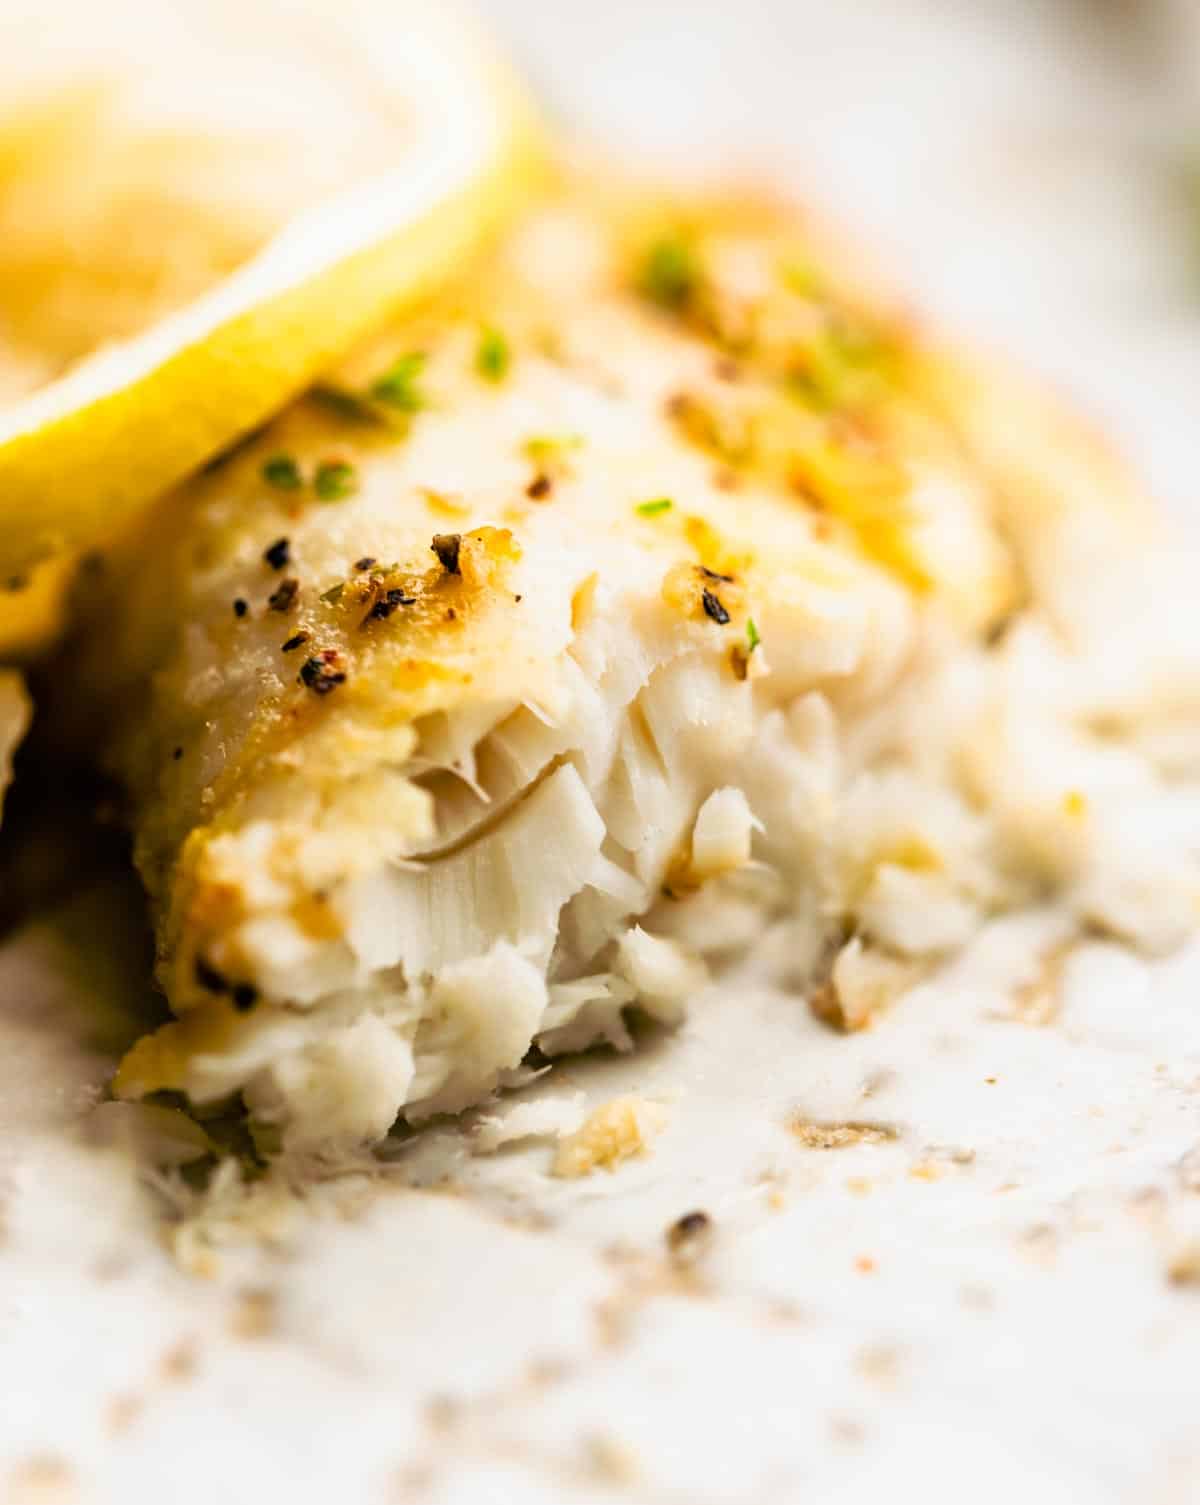 Close up show of cooked Tilapia with topped with seasonings